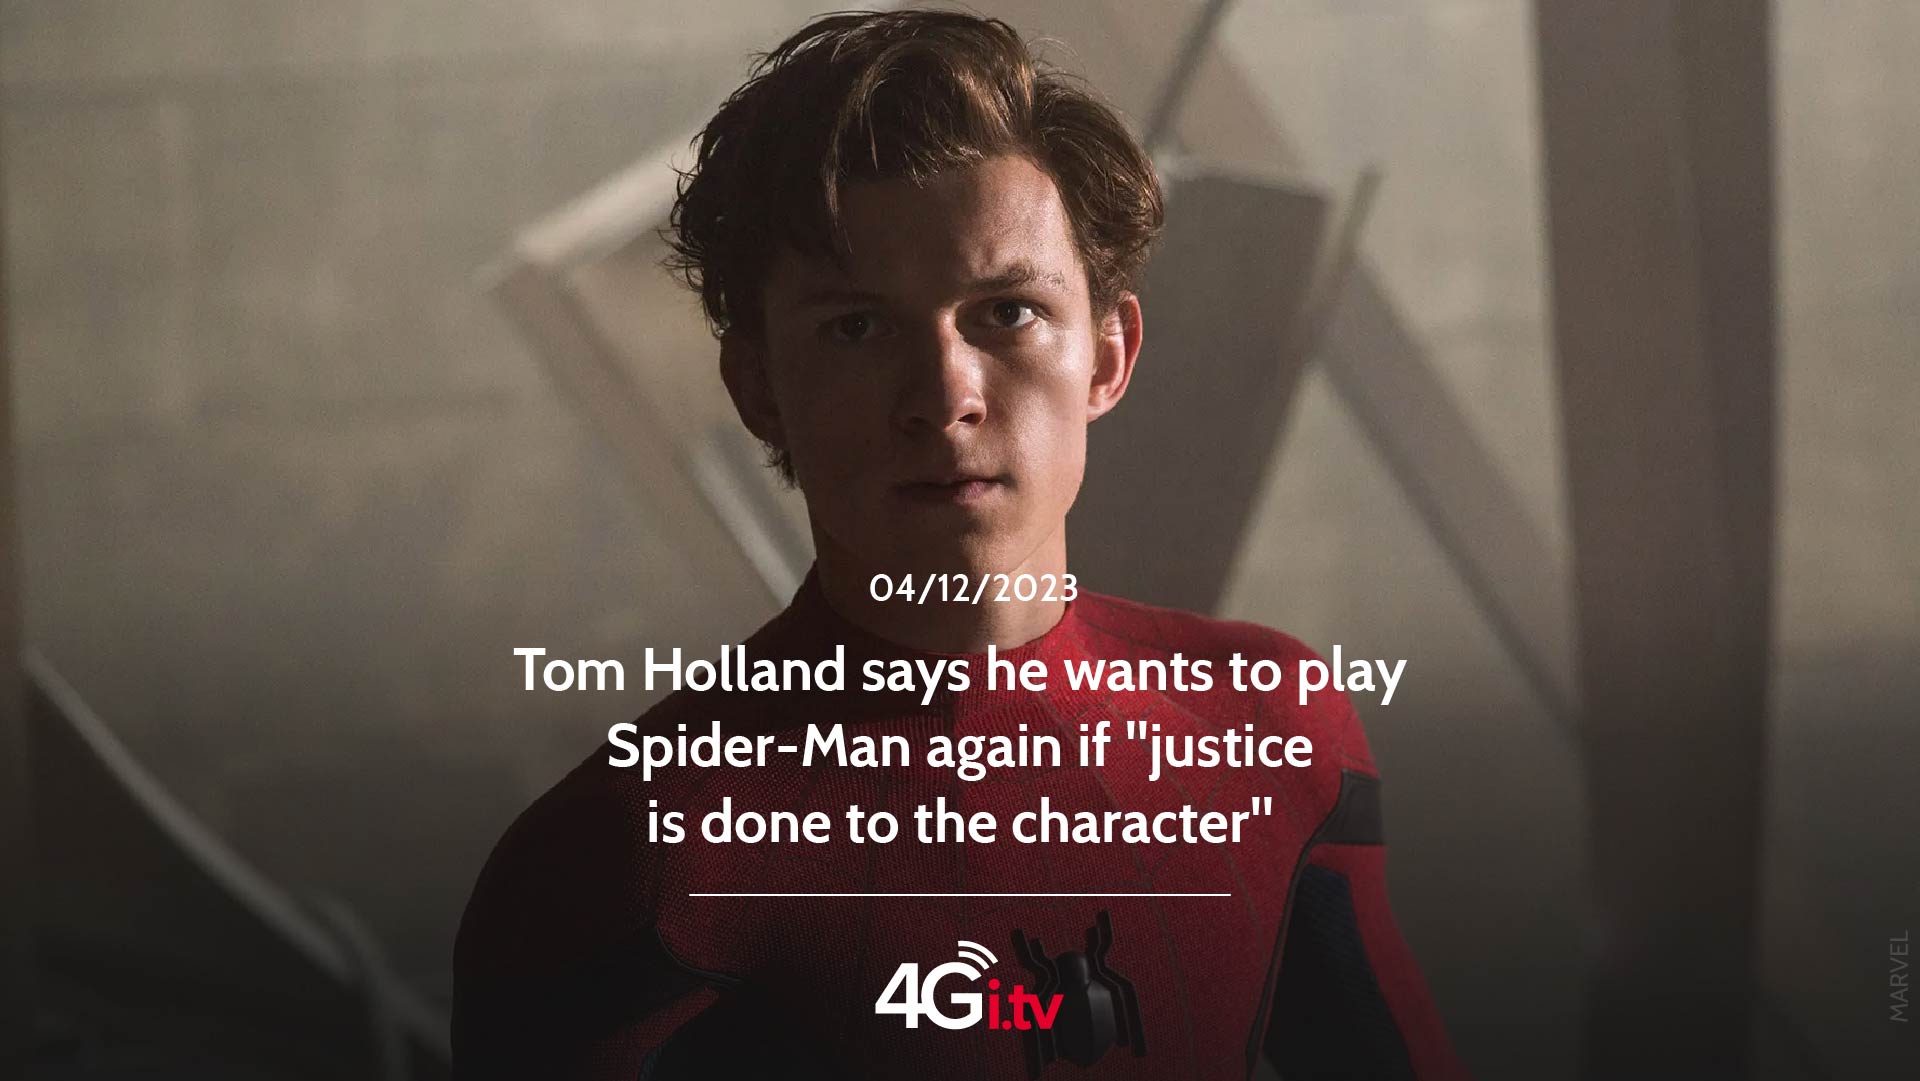 Lesen Sie mehr über den Artikel Tom Holland says he wants to play Spider-Man again if “justice is done to the character”